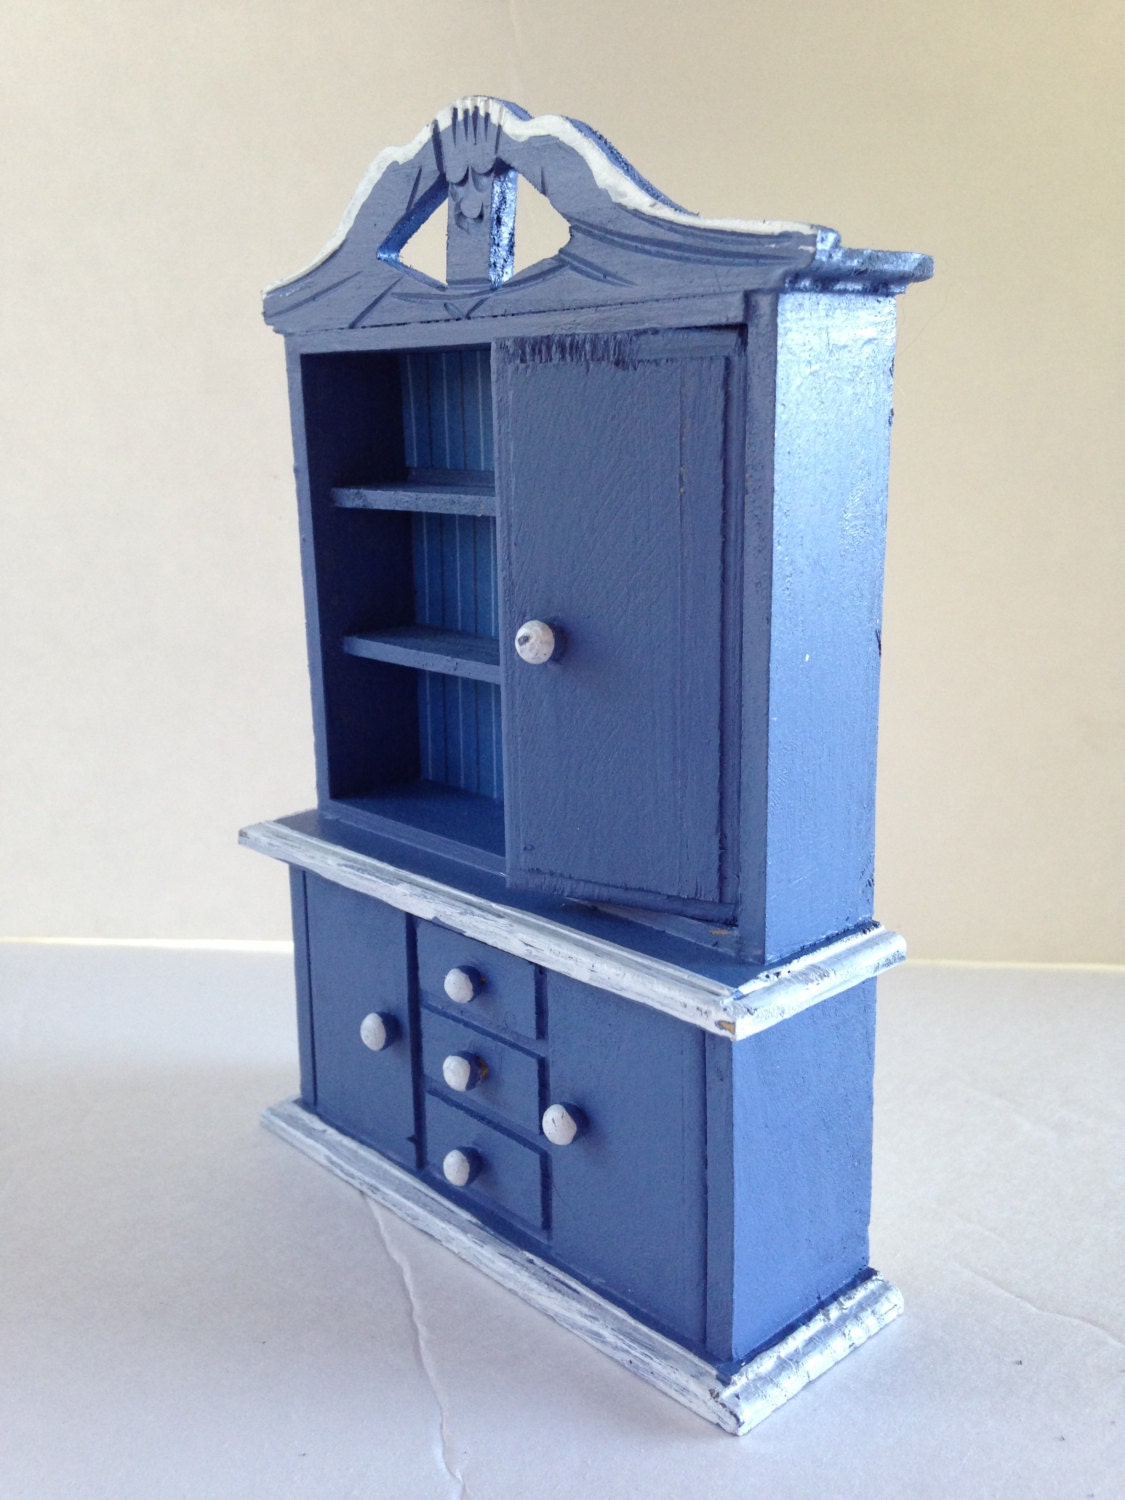 Country Cupboard - Dollhouse Blue Kitchen Cabinet with White Accents - Miniature Hutch - Fairy Furniture - EightBoardsFarm